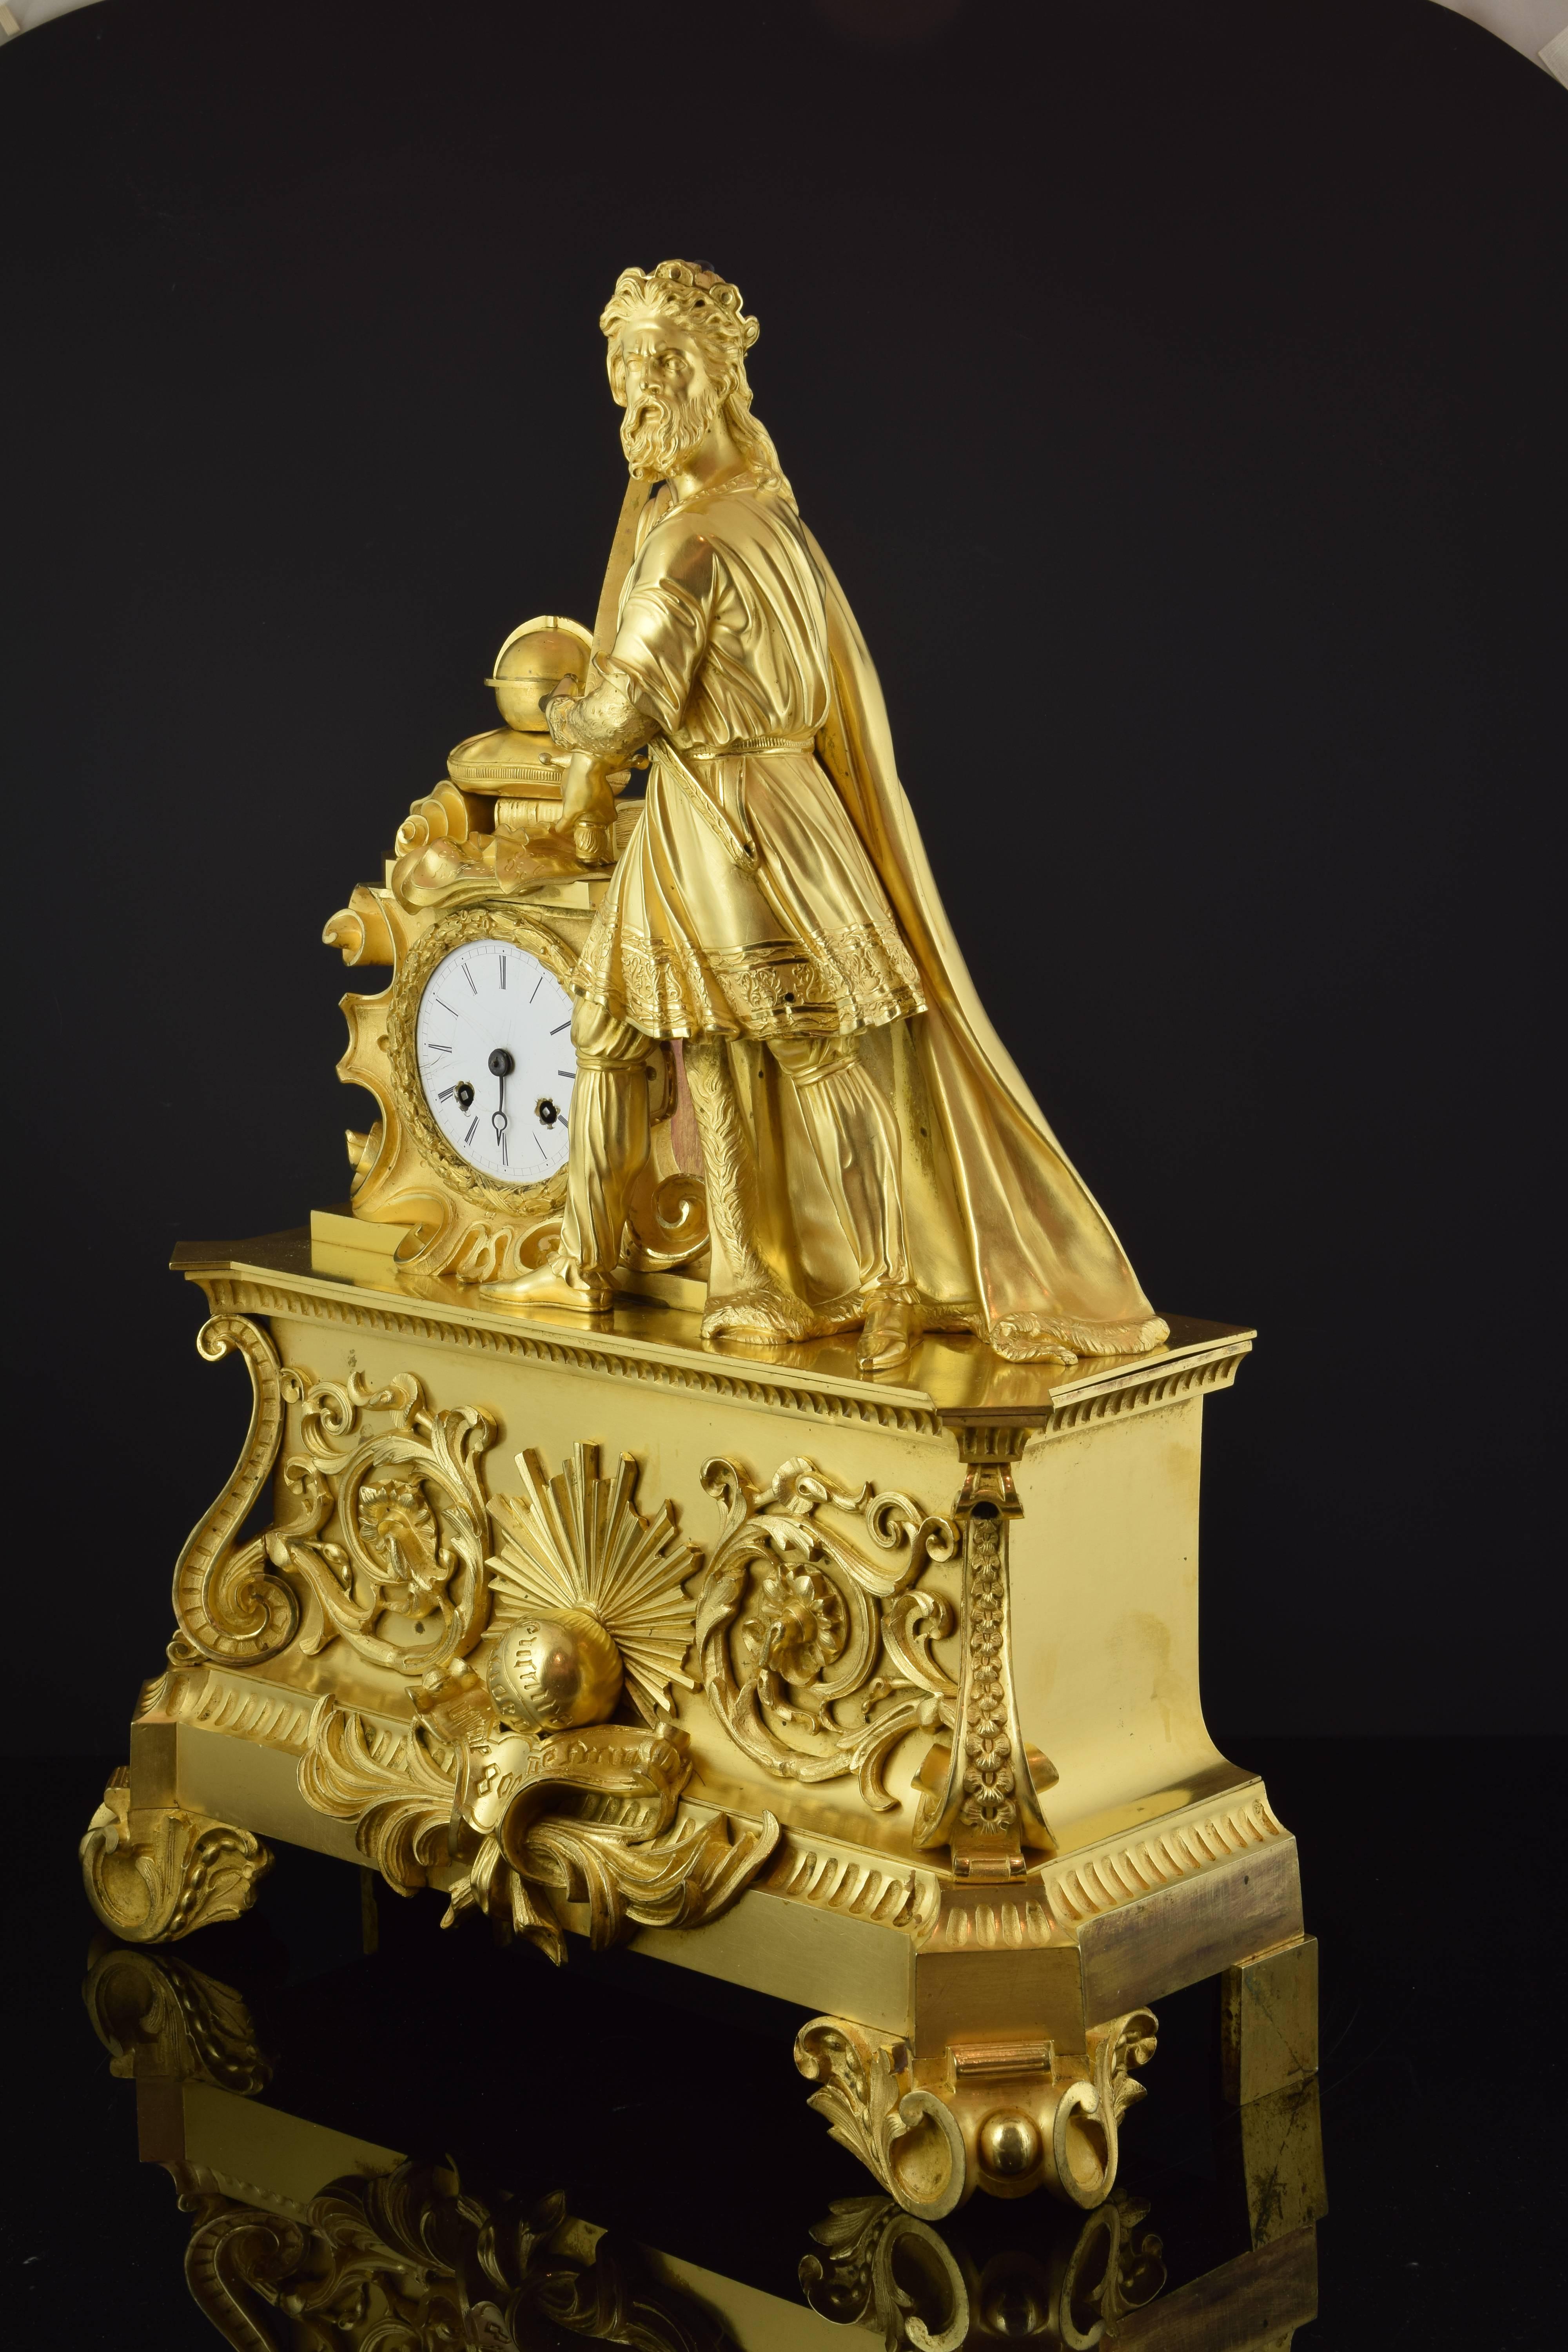 Table clock made of gilded bronze with a powerful base, enhanced with legs decorated with vegetal and architectural motifs of classicist inspiration and a series of details on the front (volutes in the chamfered corners, volutes and a center with a